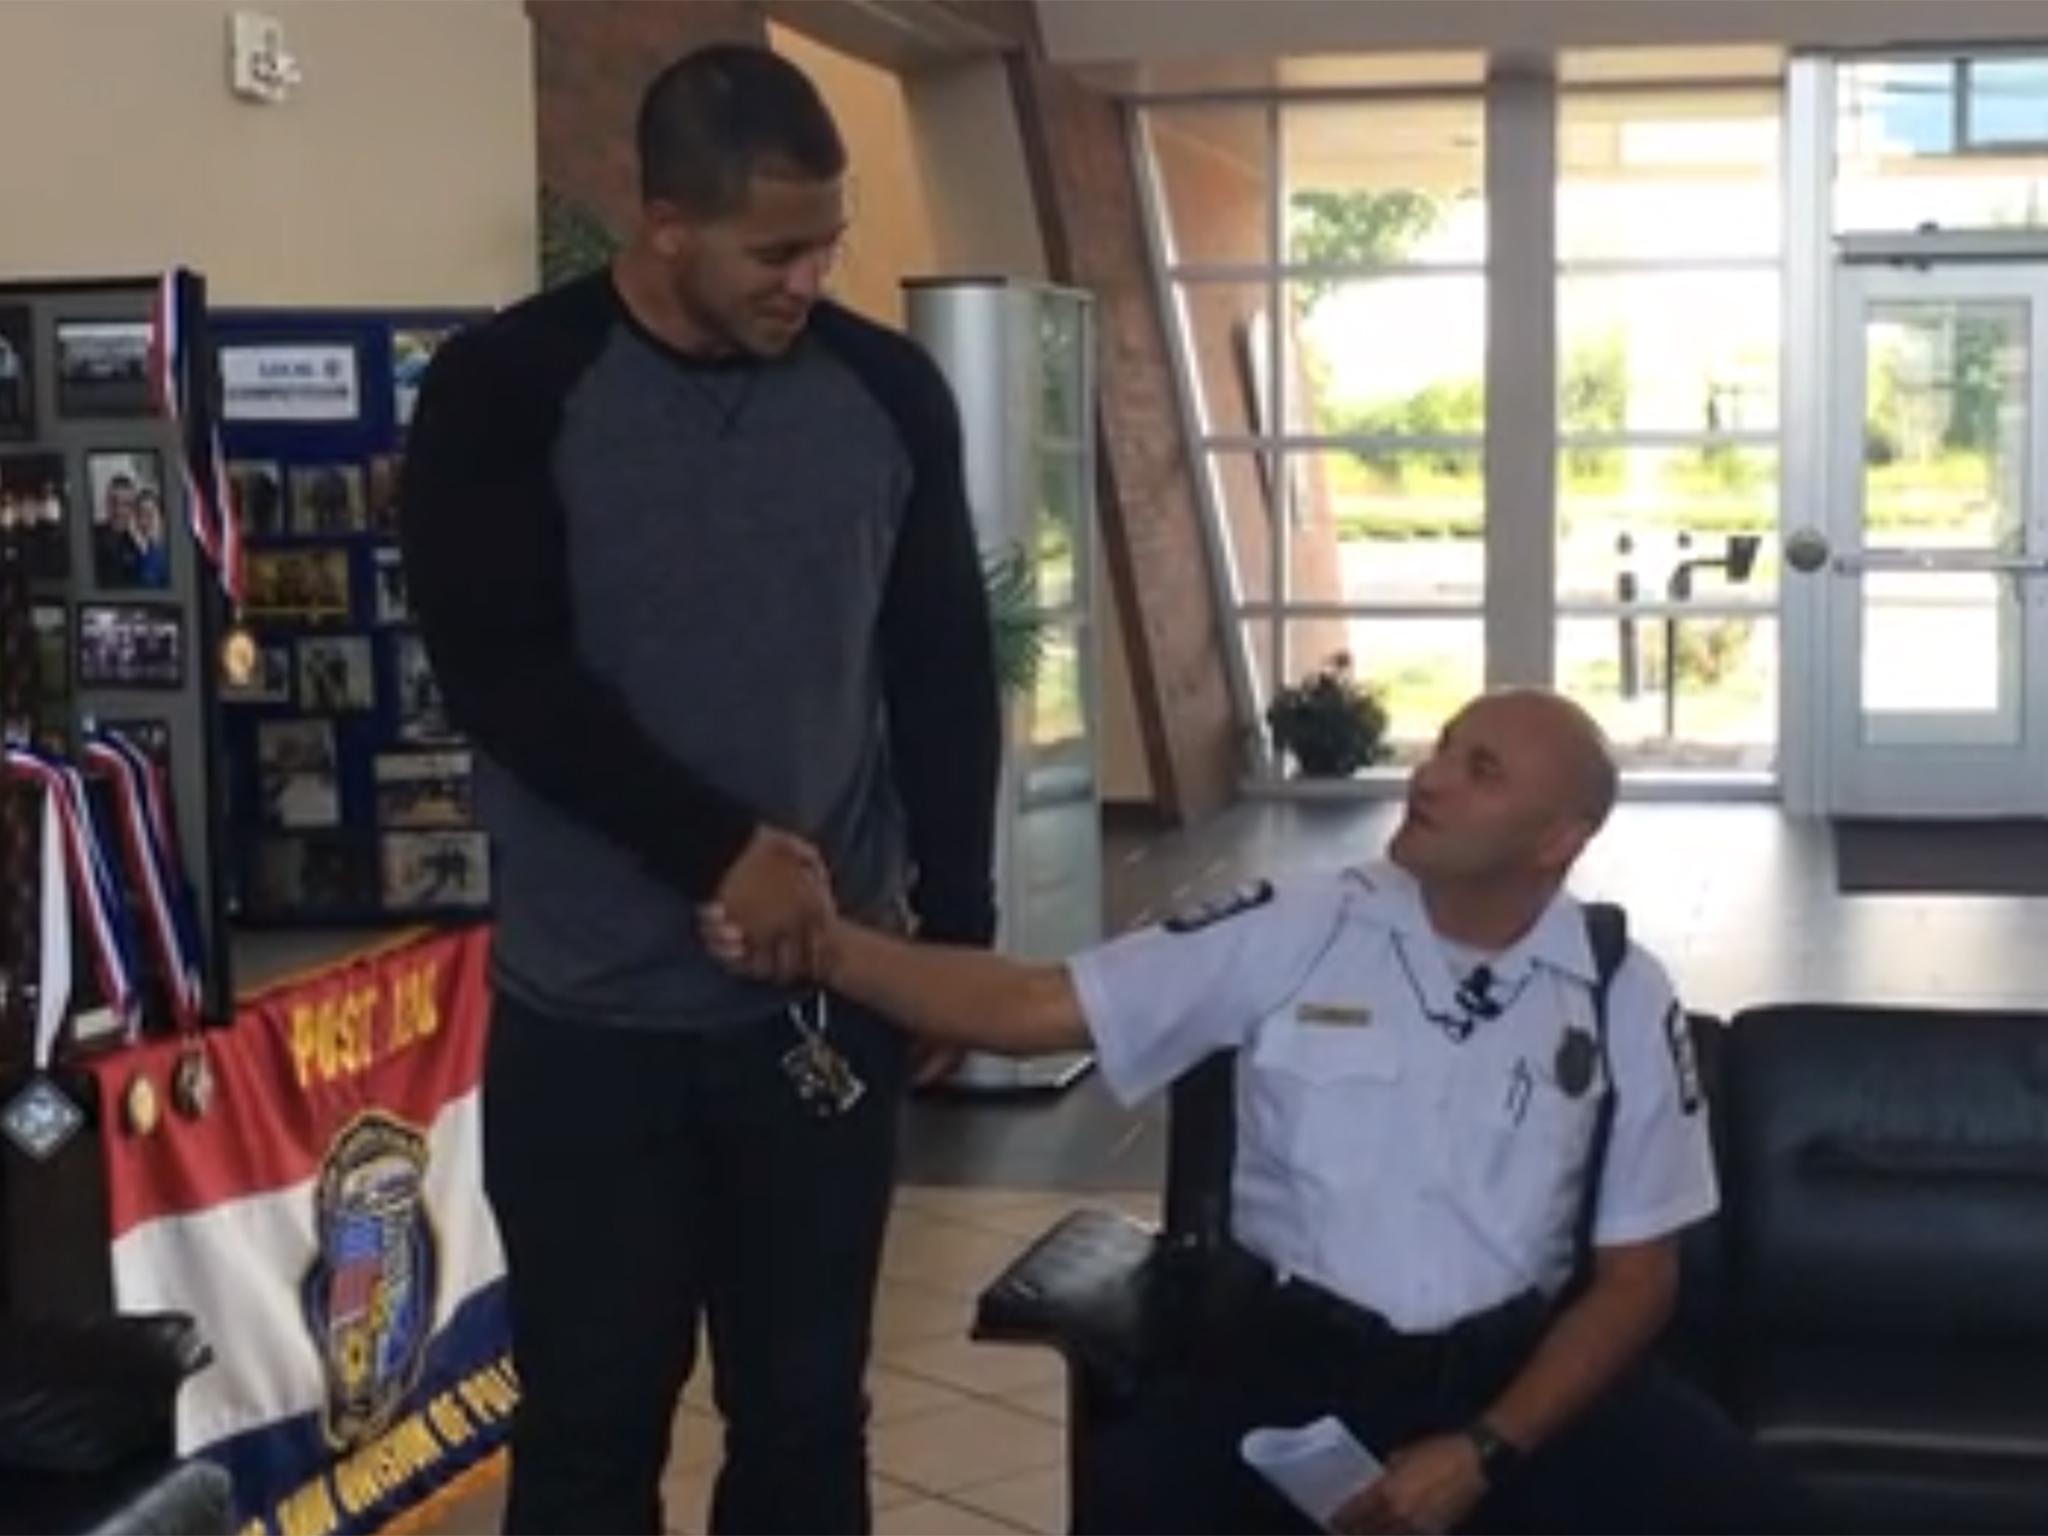 Christopher Jones (L) shakes Officer James Poole's (R) hand